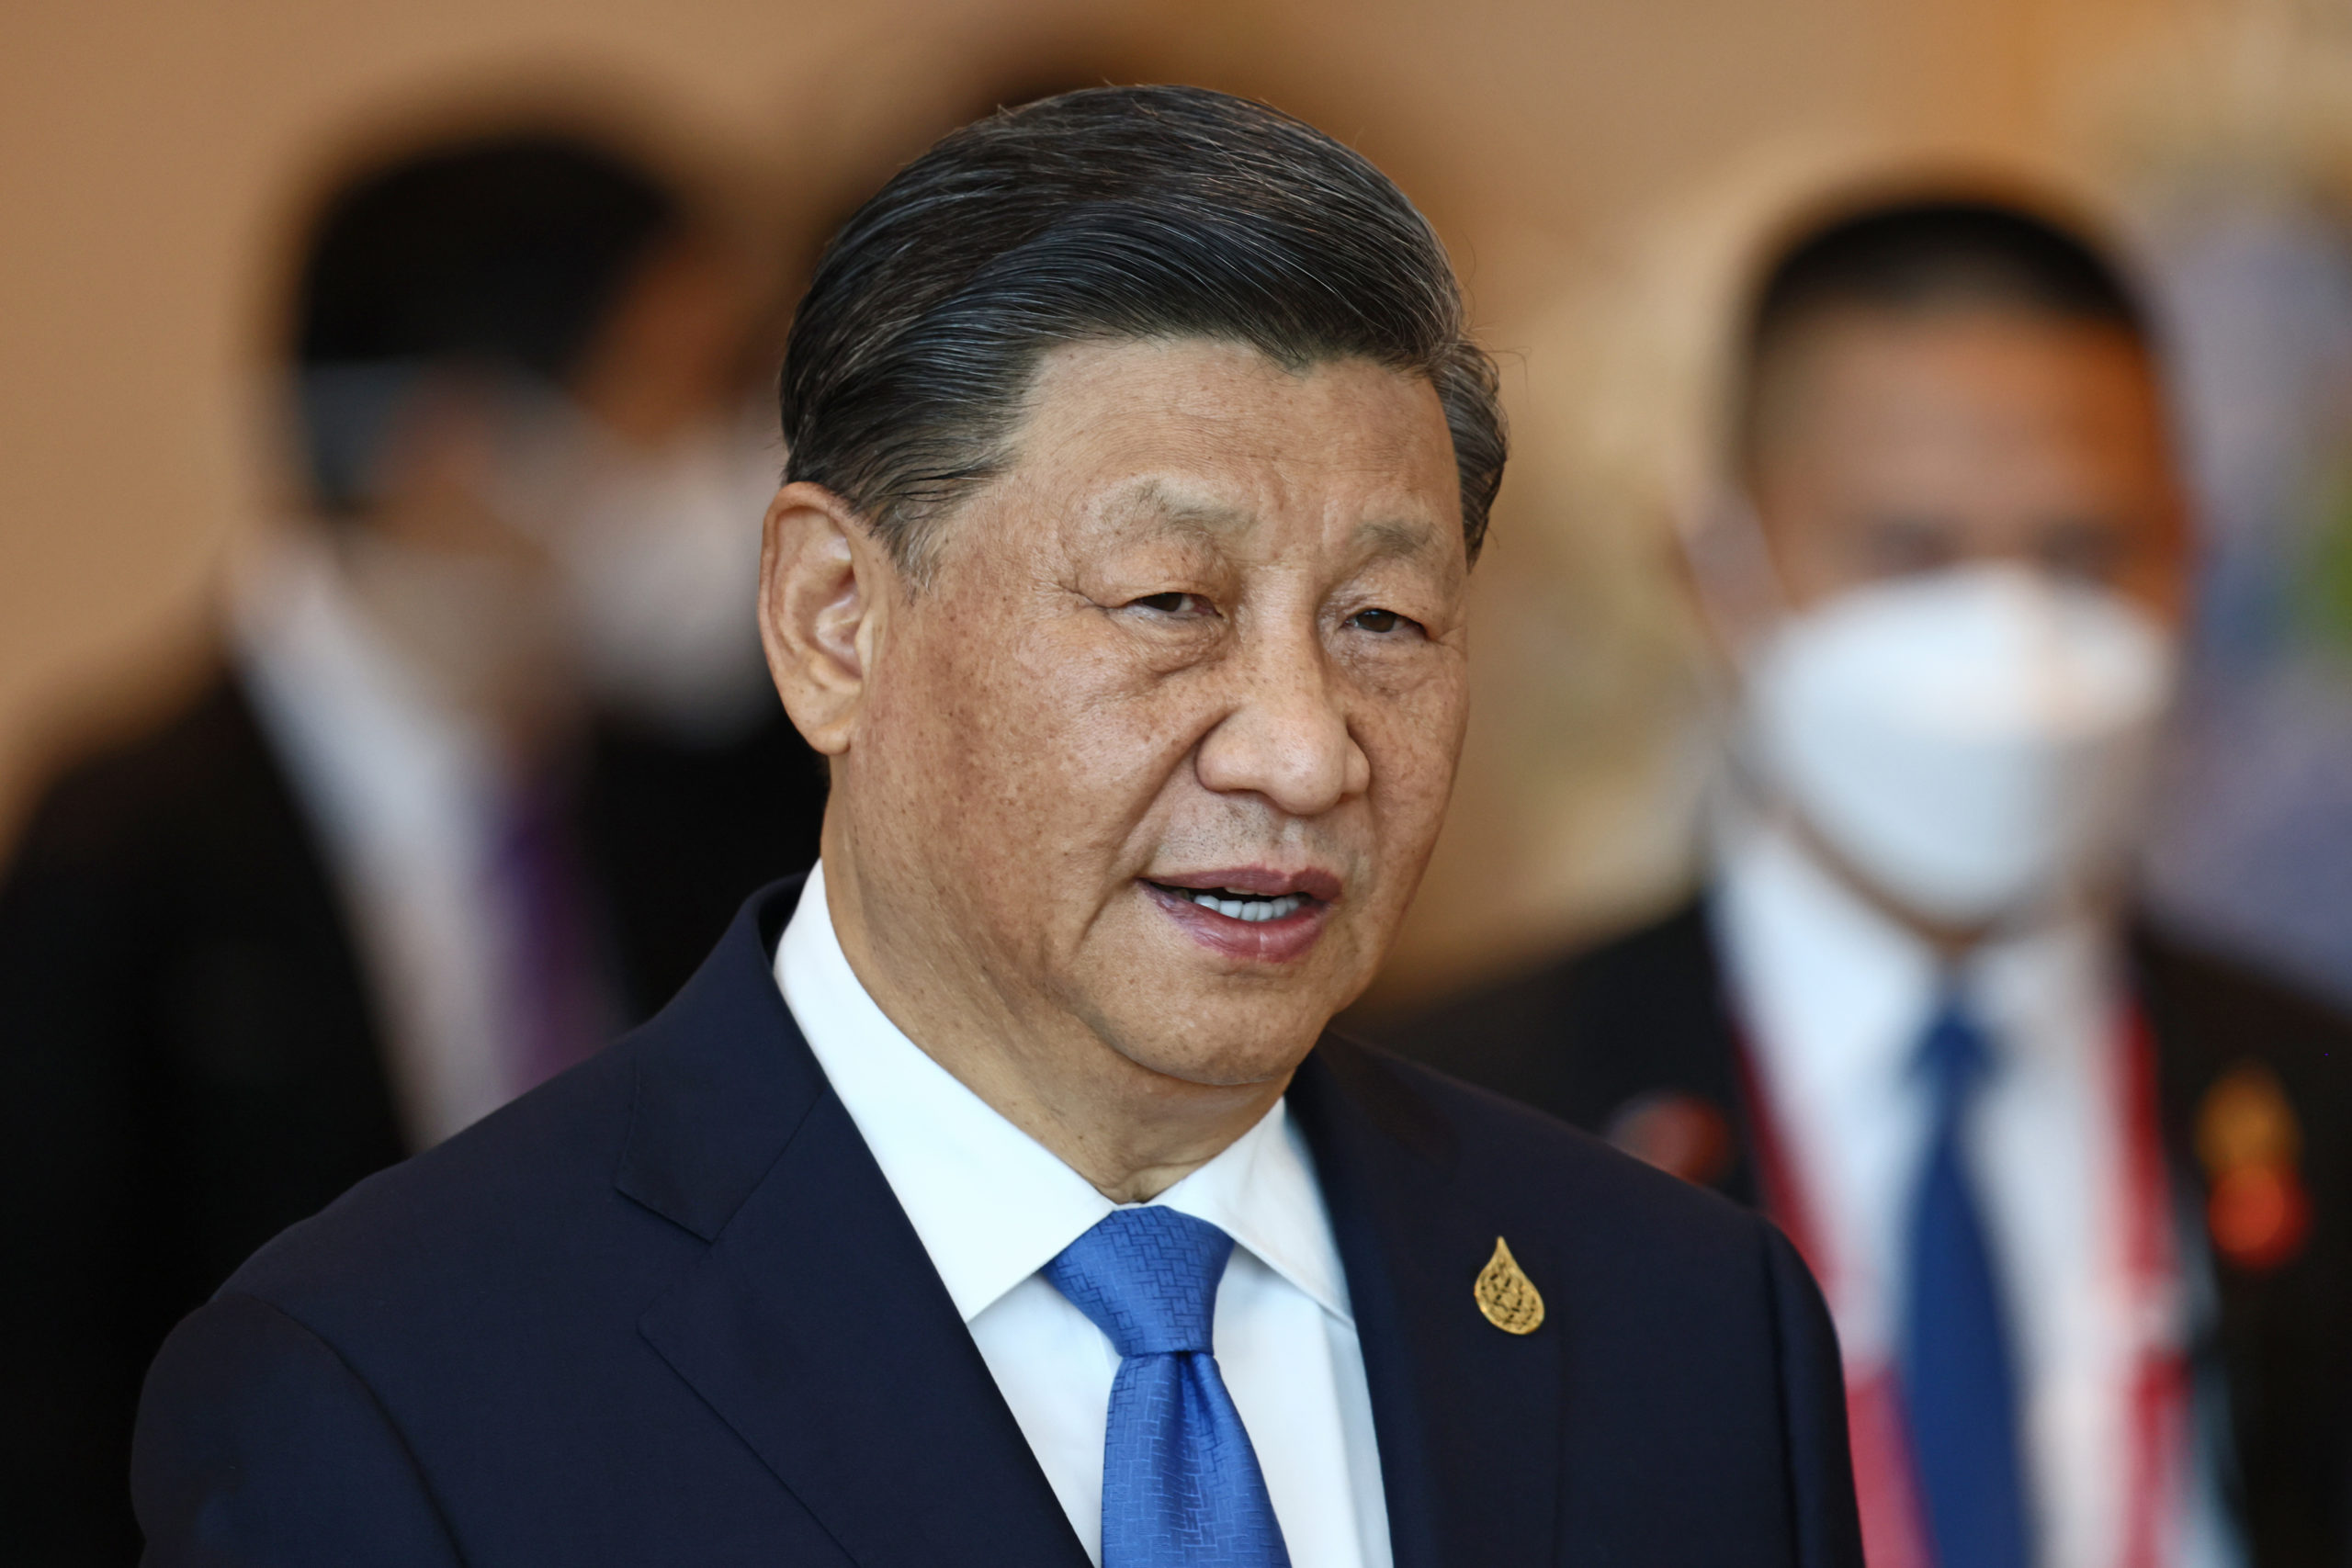 China's President Xi Jinping arrives to attend the APEC Economic Leaders Meeting during the Asia-Pacific Economic Cooperation in Bangkok, Thailand, on Nov. 19, 2021.